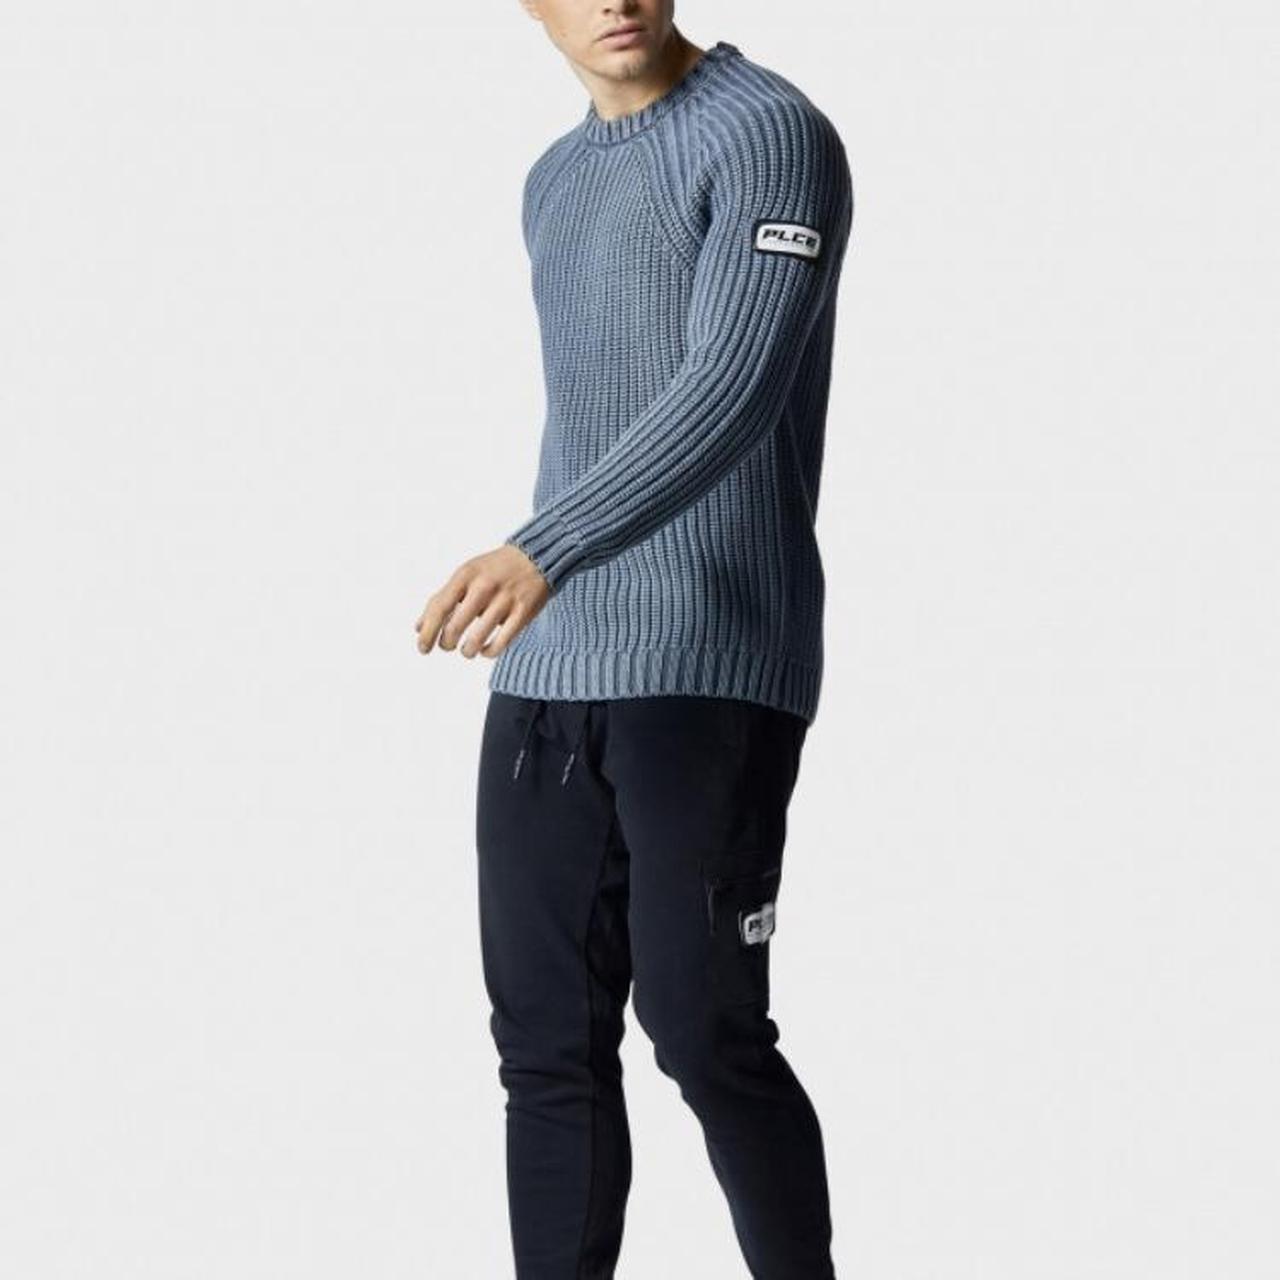 Product Image 1 - 883 POLICE

Winford Blue Knitwear

PLCE Winfold